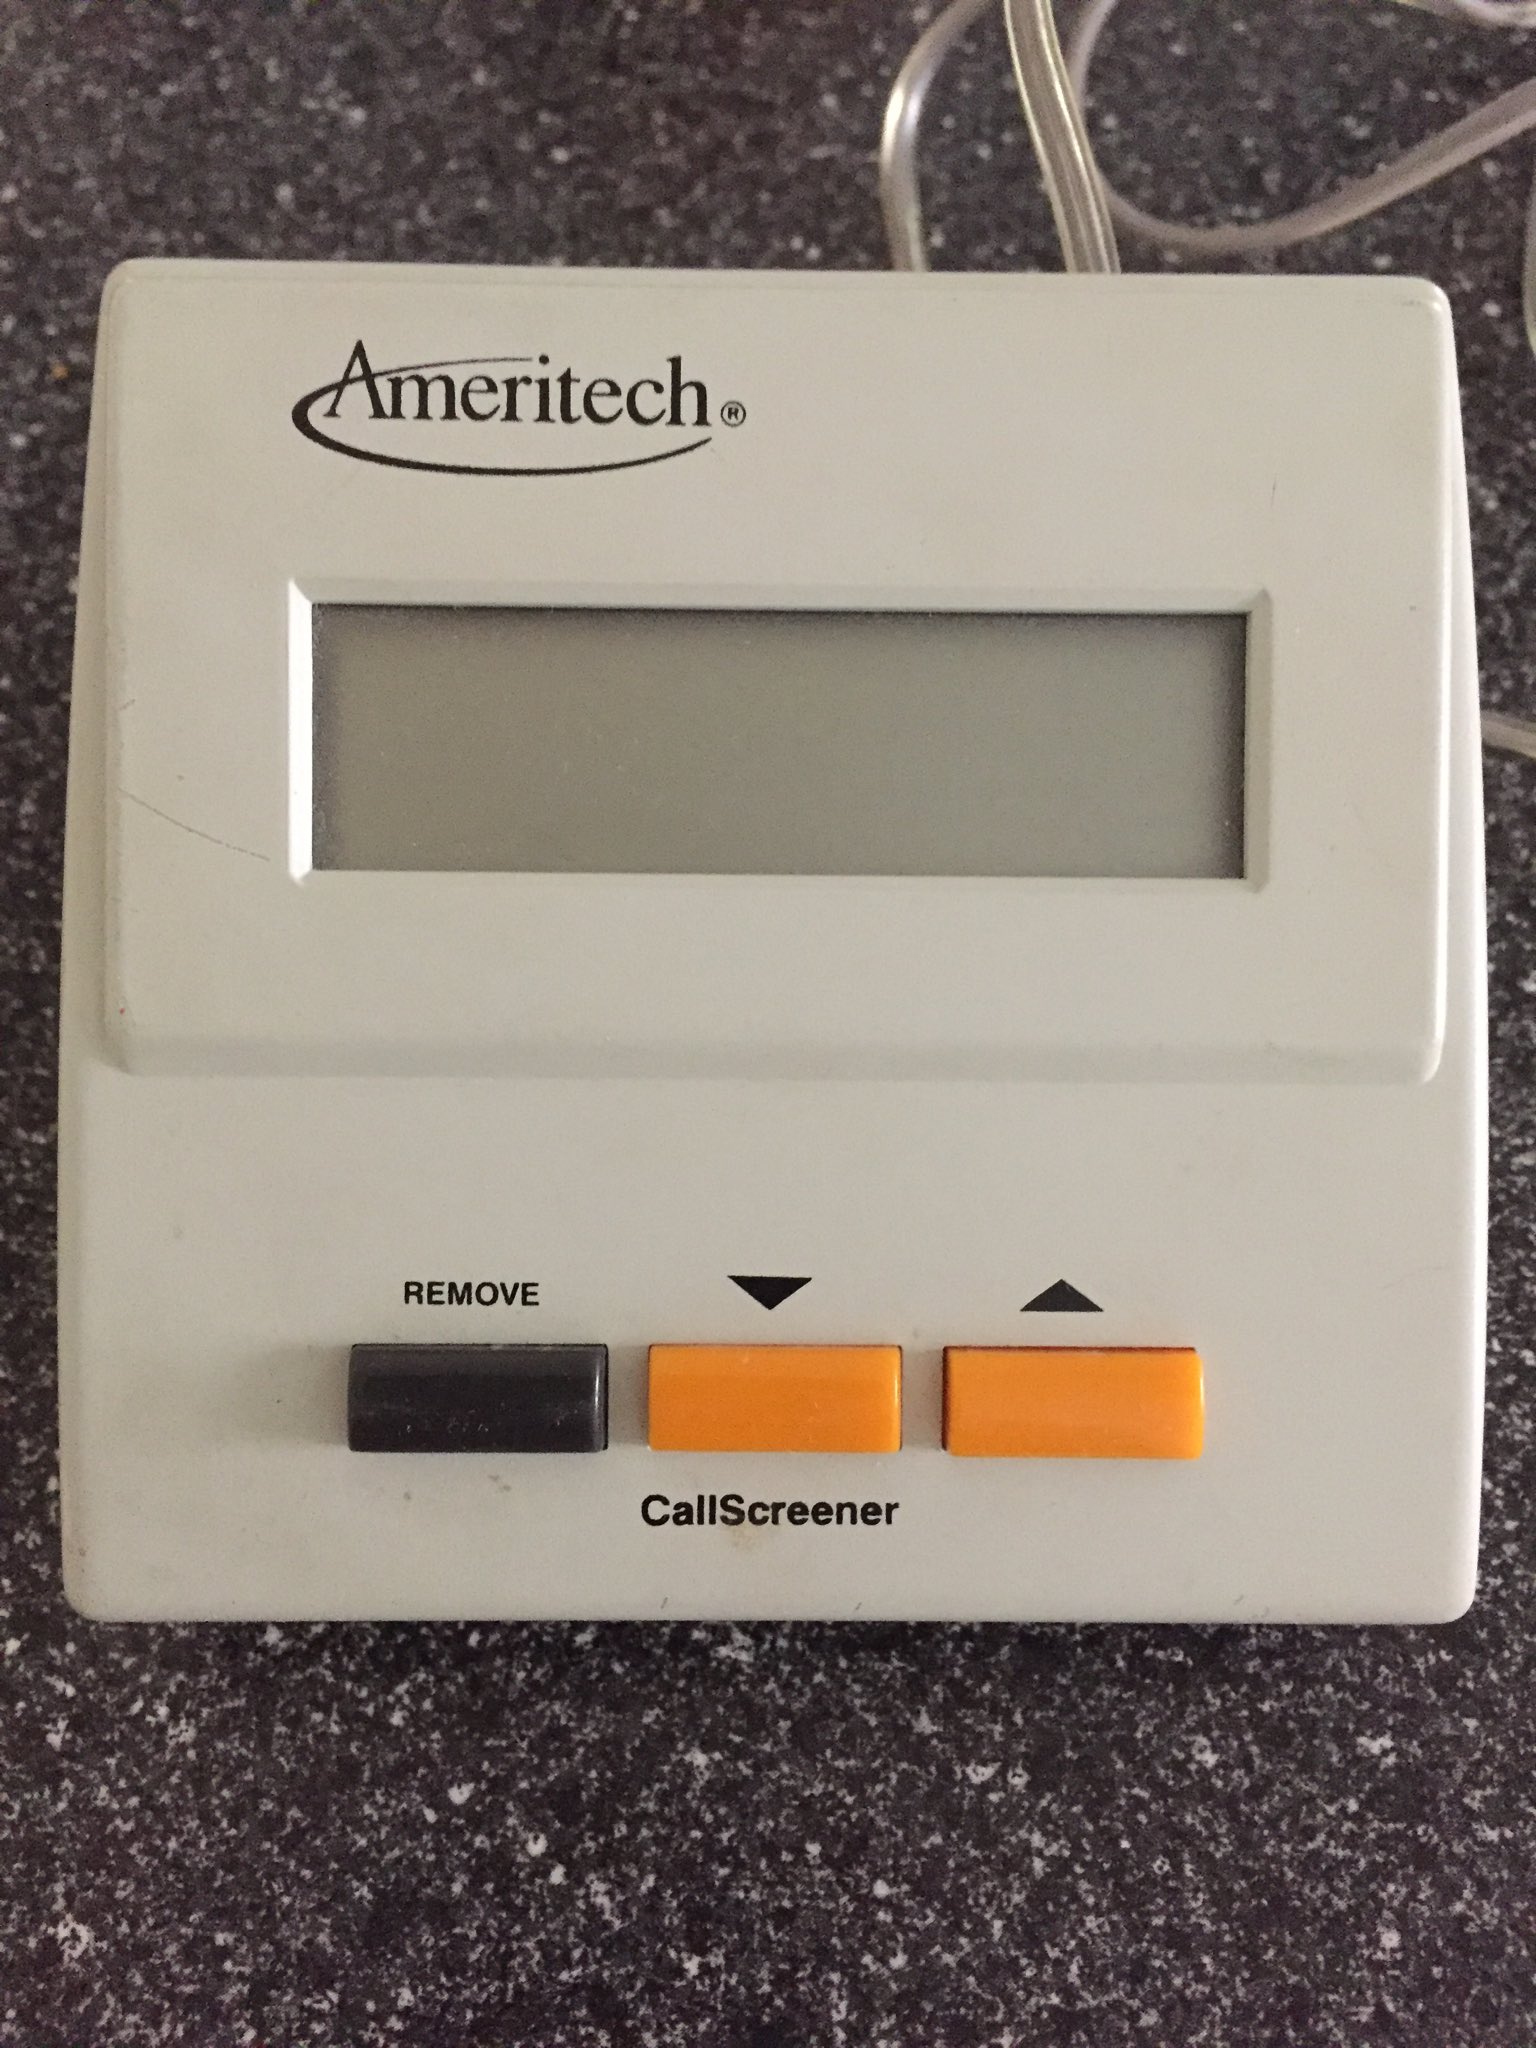 Paul Oestreicher on X: Our caller ID box - 1990's. #Tbt